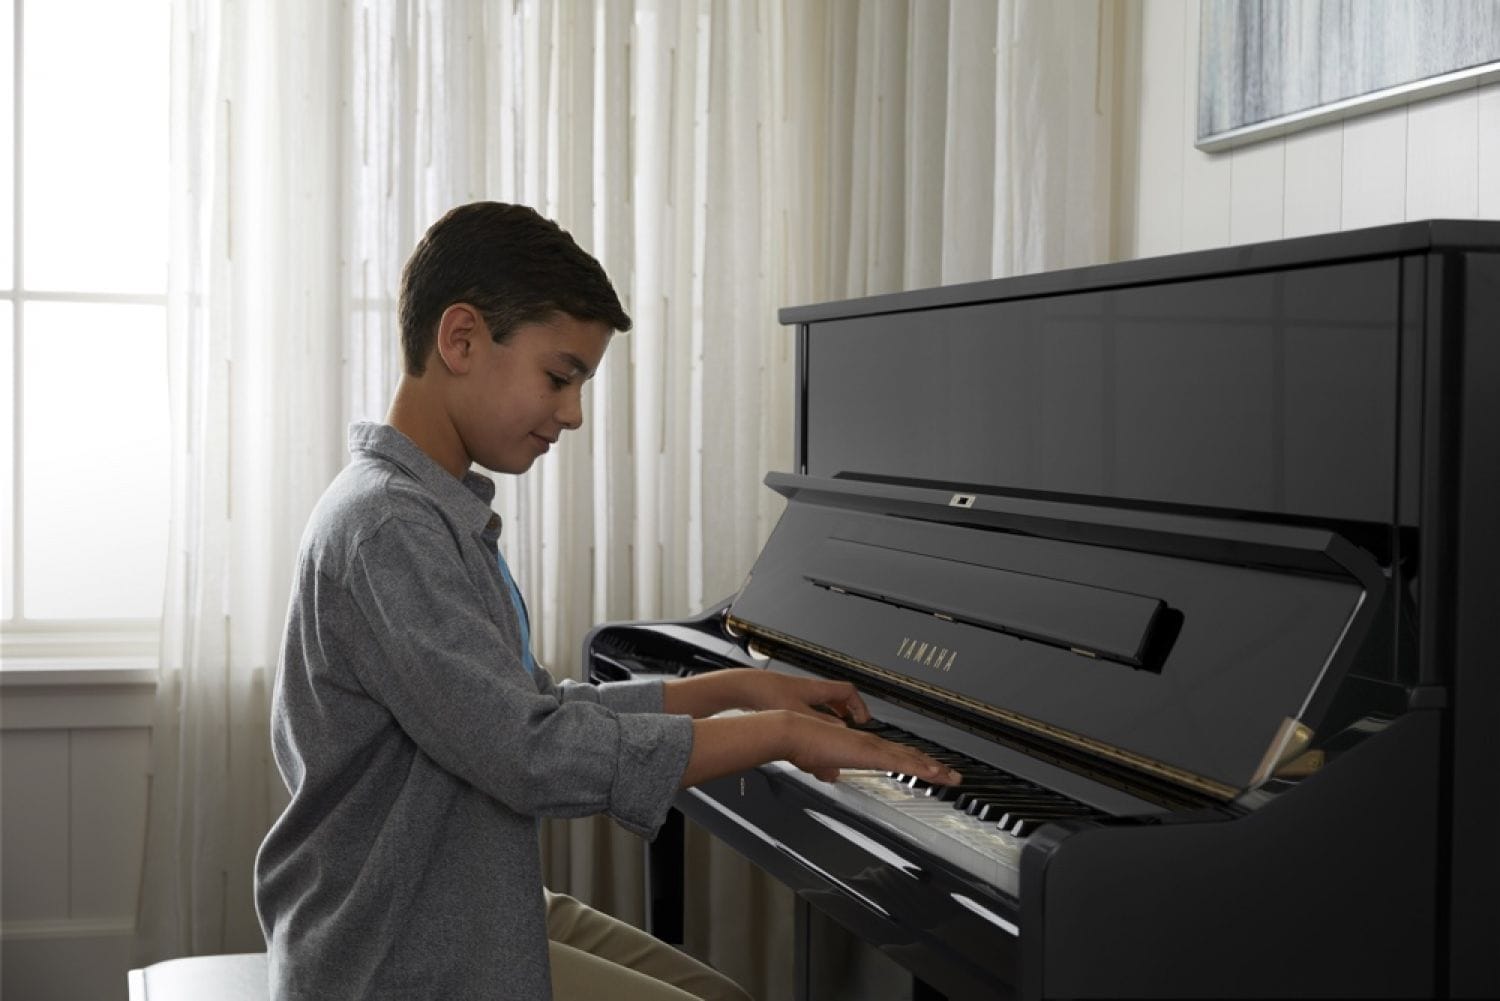 Young boy smiling as he plays a Yamaha upright piano in a living room setting.